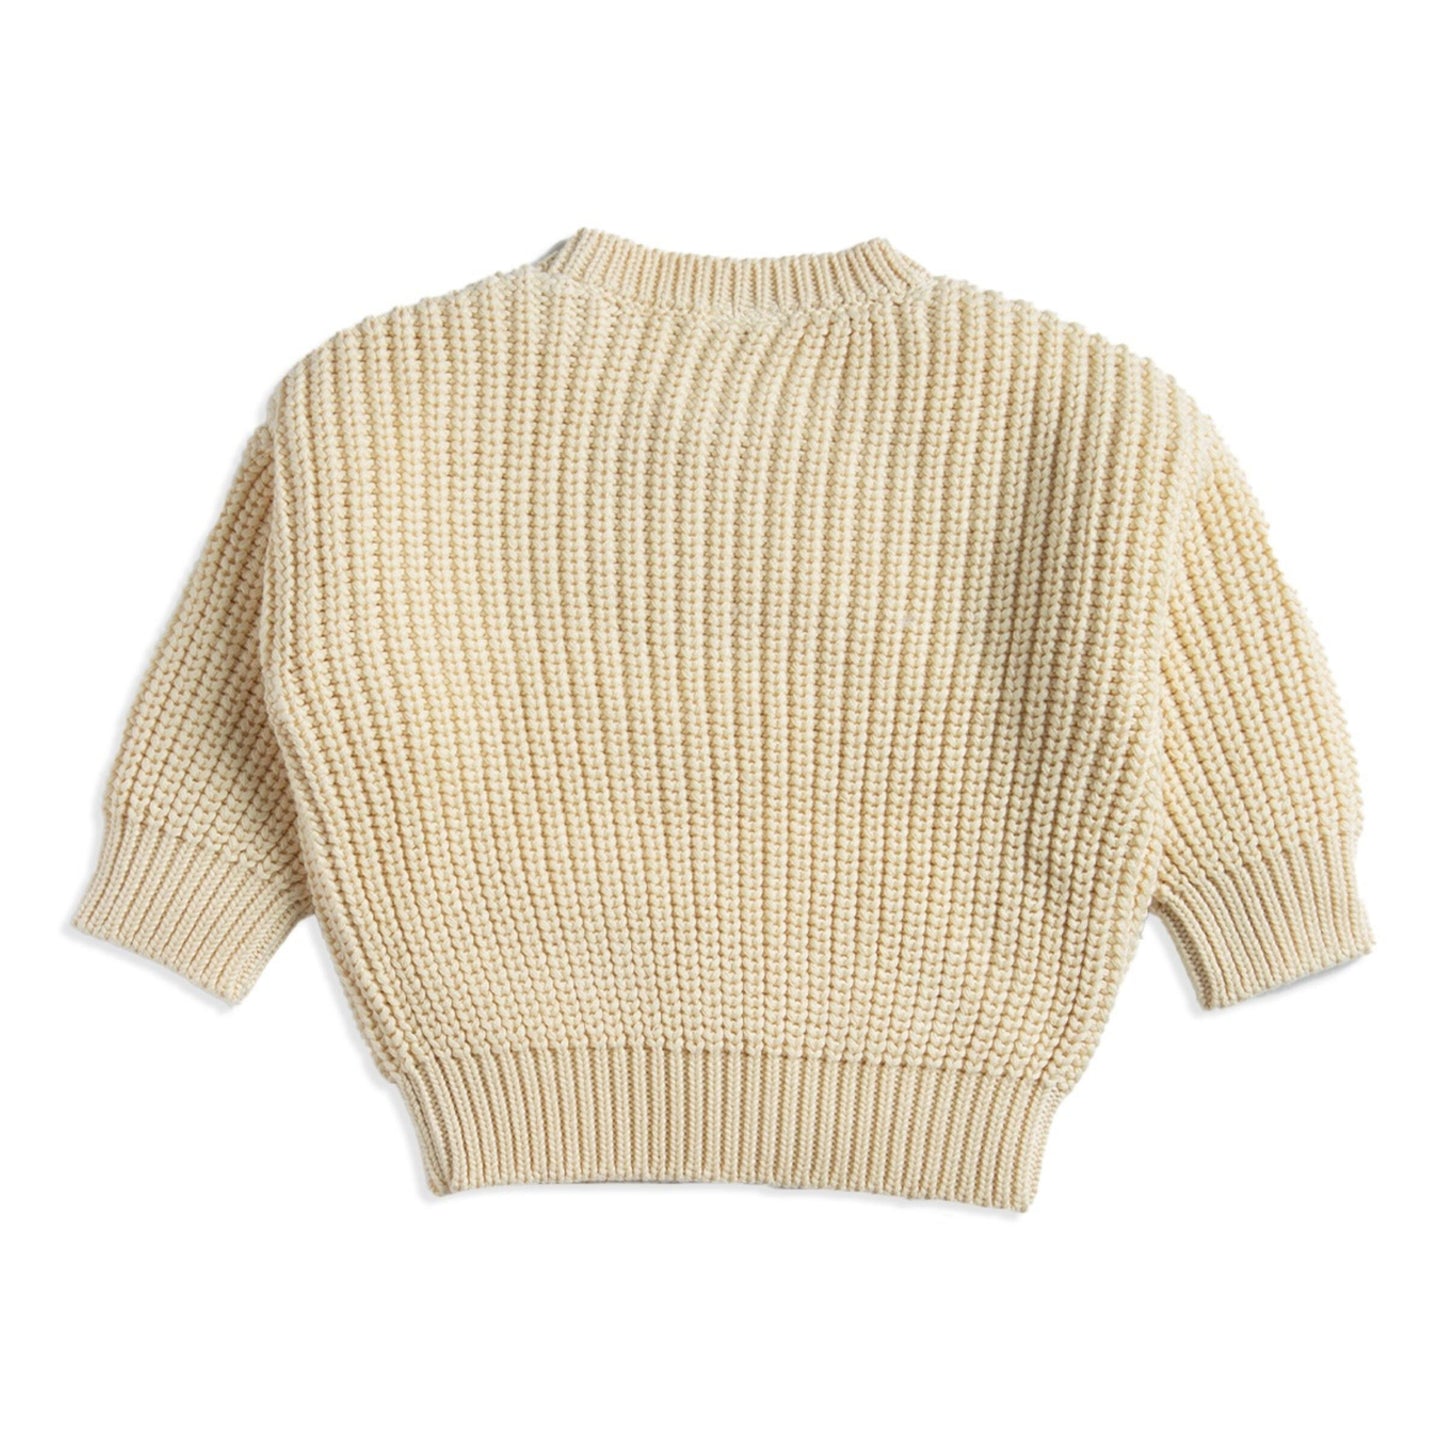 Tiny Twig Knitted Chunky Sweater - Birch